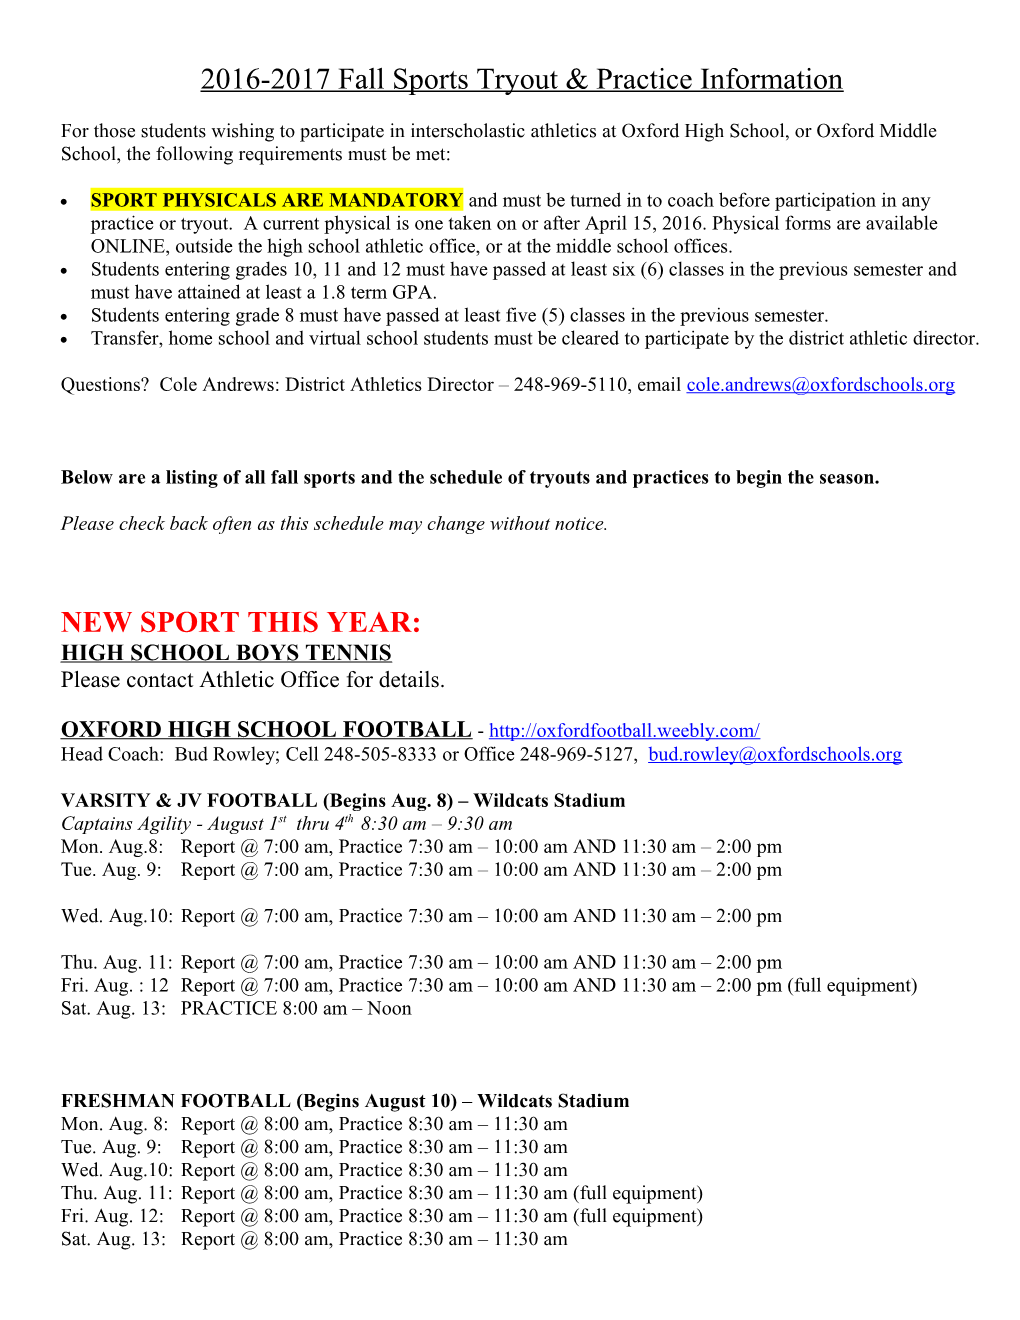 2007 Fall Sports Tryout & Practice Information